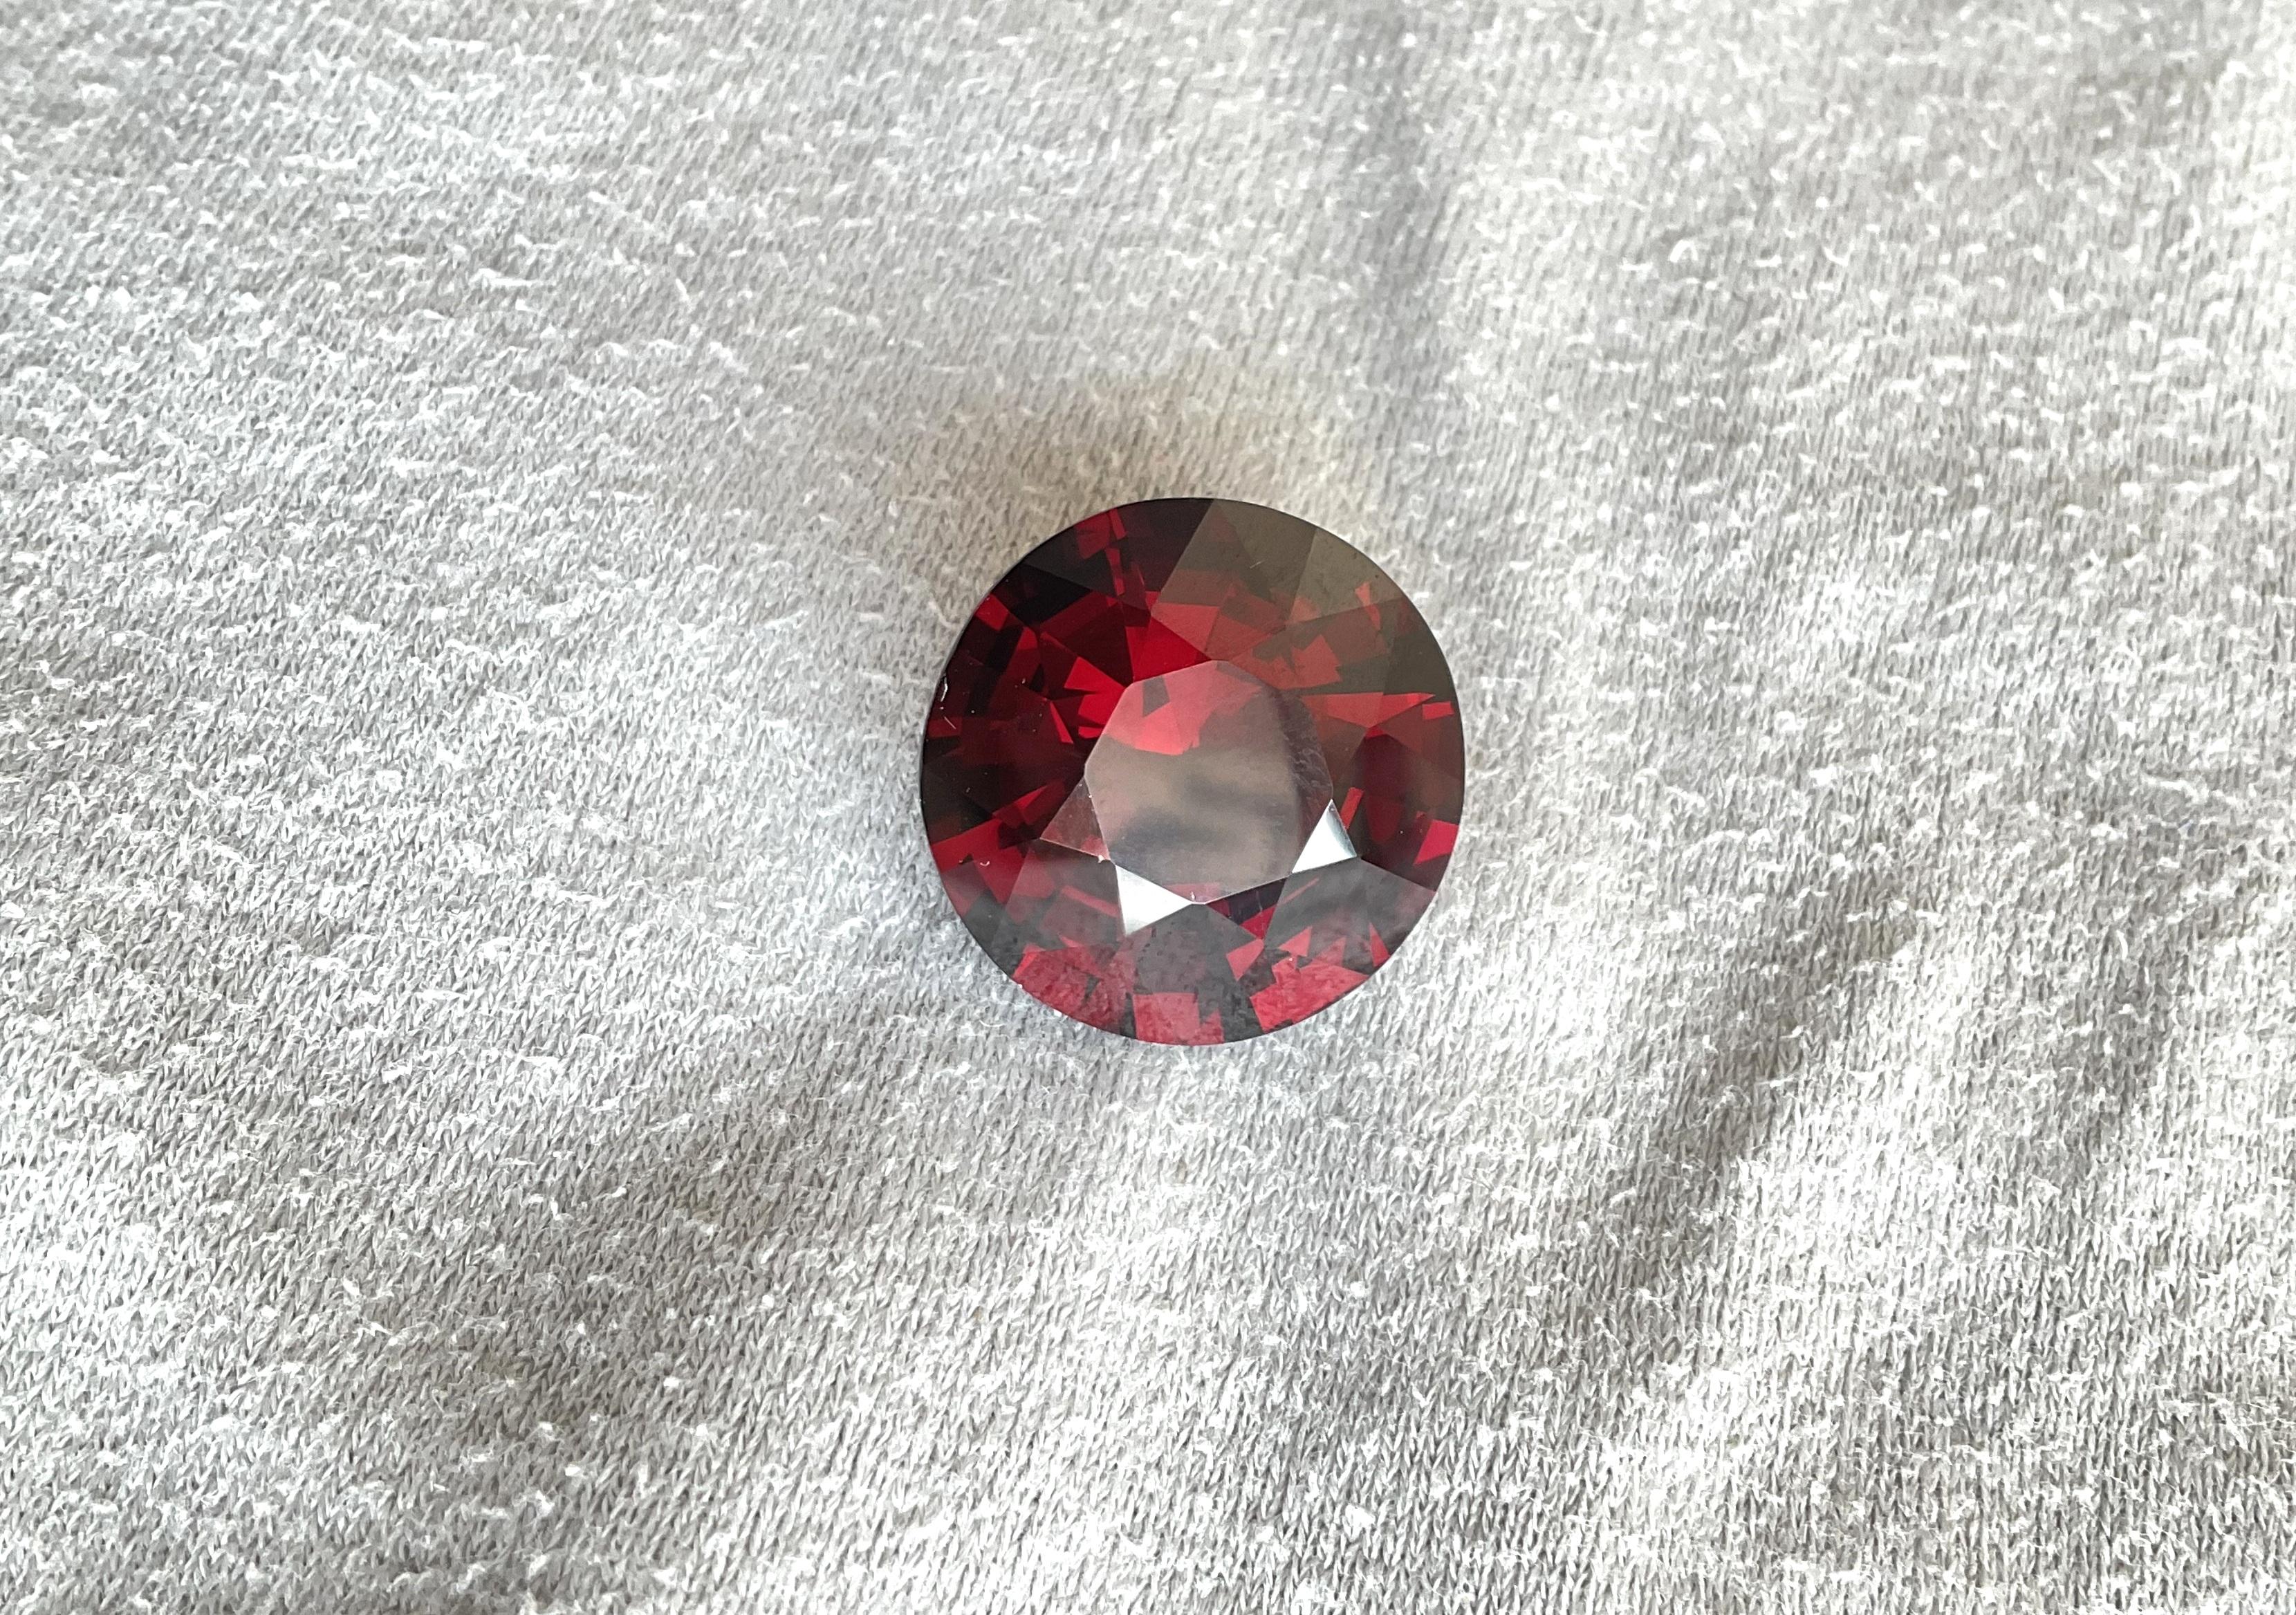 34.26 Carats Garnet Round Cut Stone Natural Gem For Top Fine Jewelry

Weight : 34.26 Carats
Size : 20MM
Quantity : 1 Piece
Shape : Round Cut Stone
